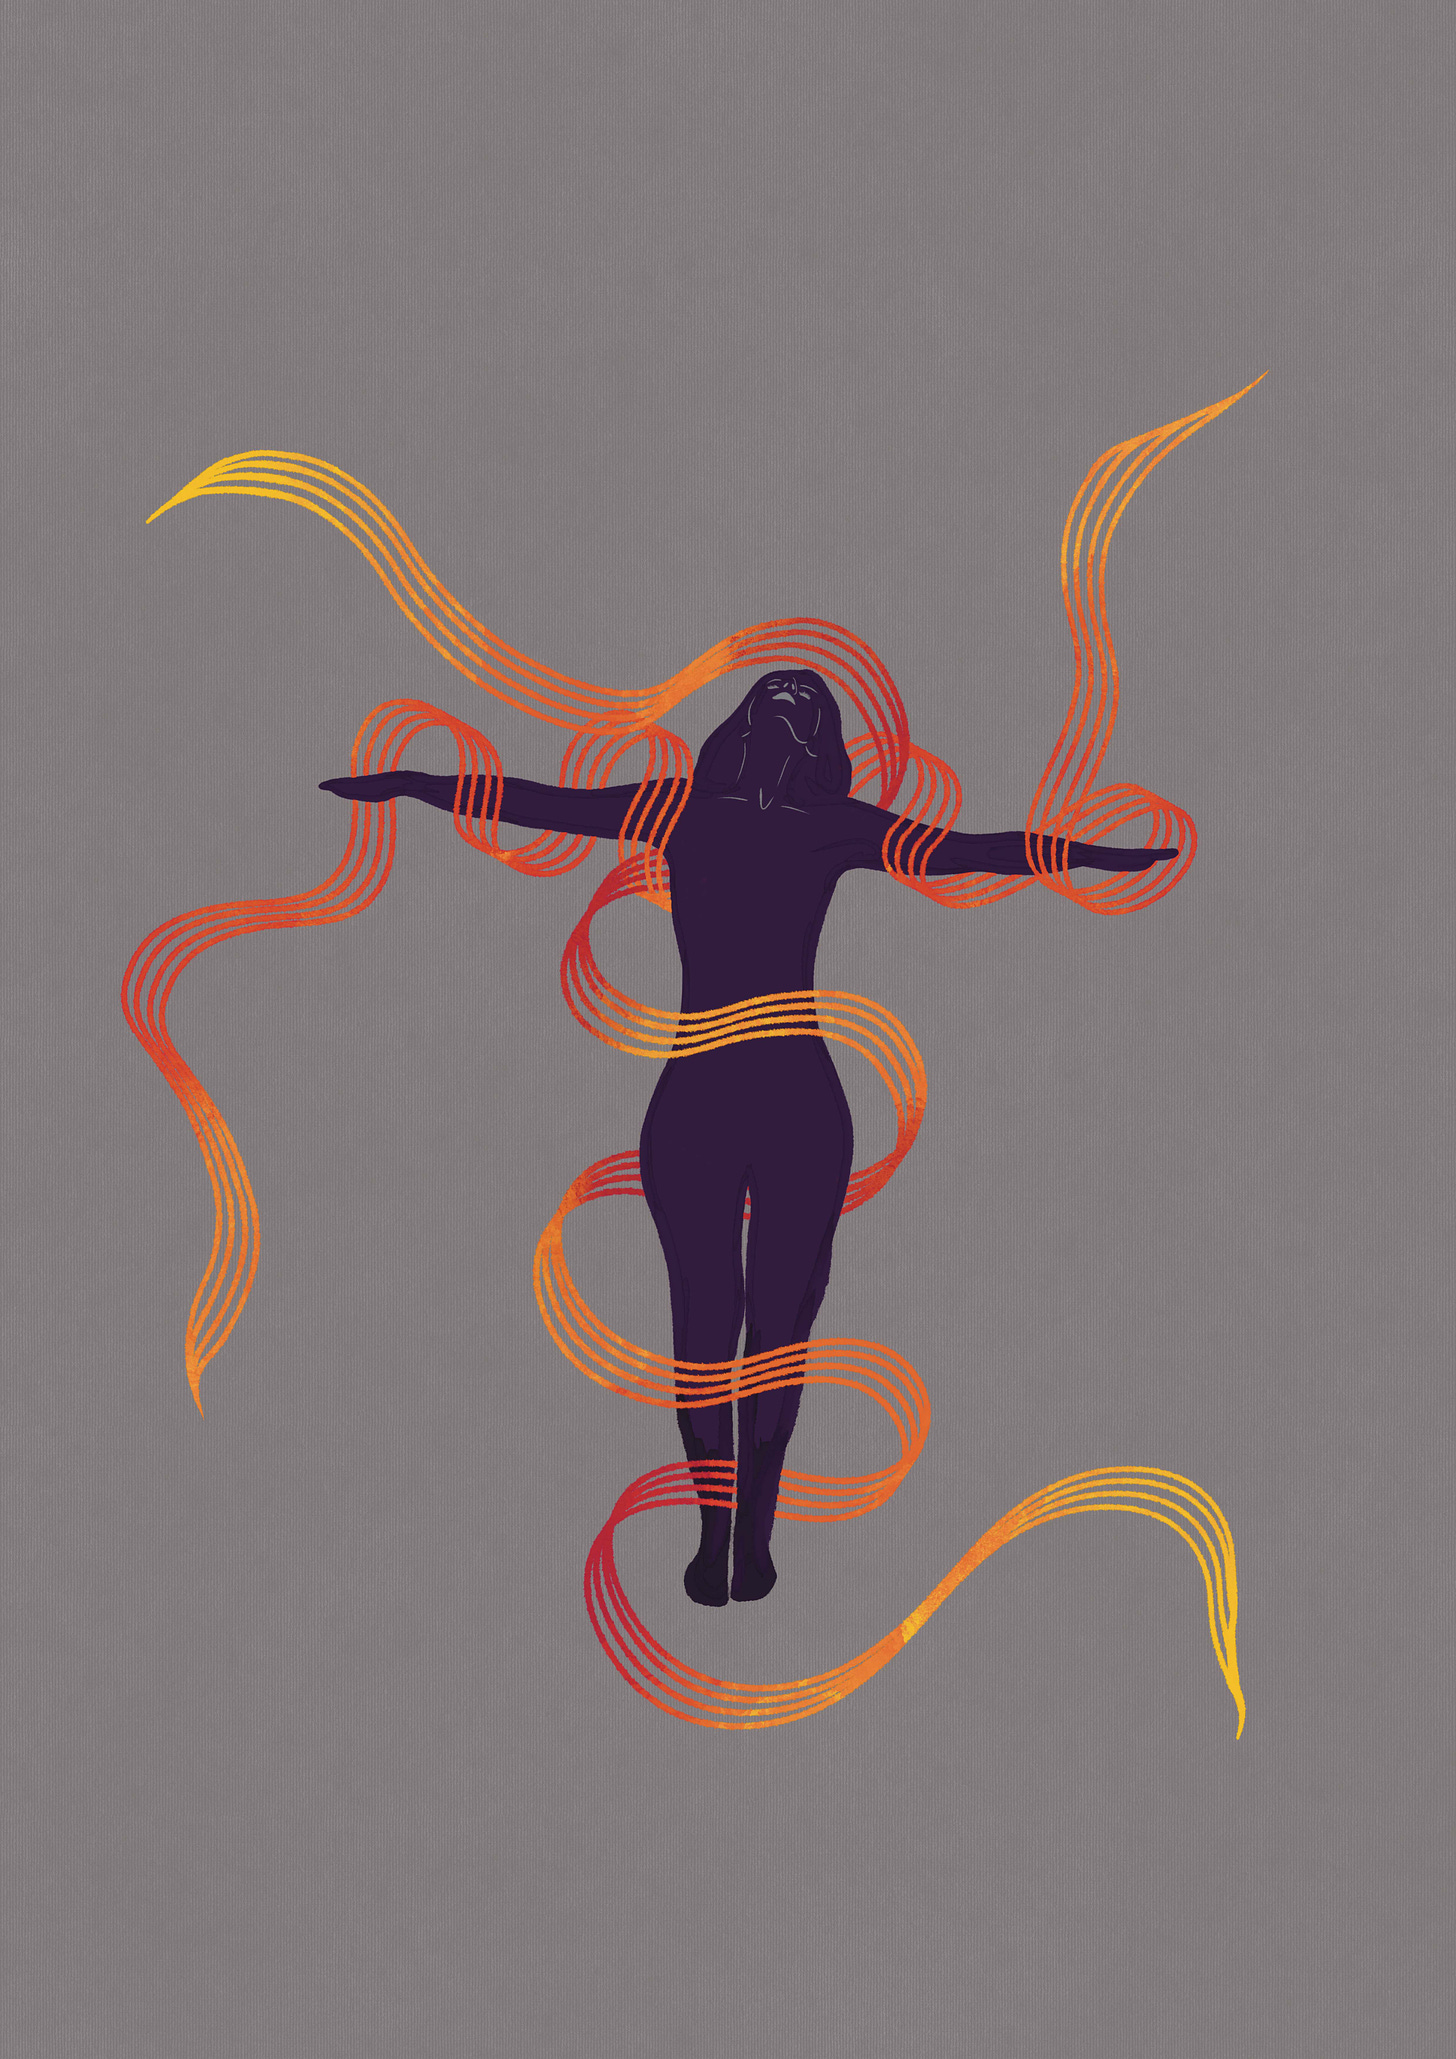 Illustration of woman surrounded by orange threads of intense, powerful energy